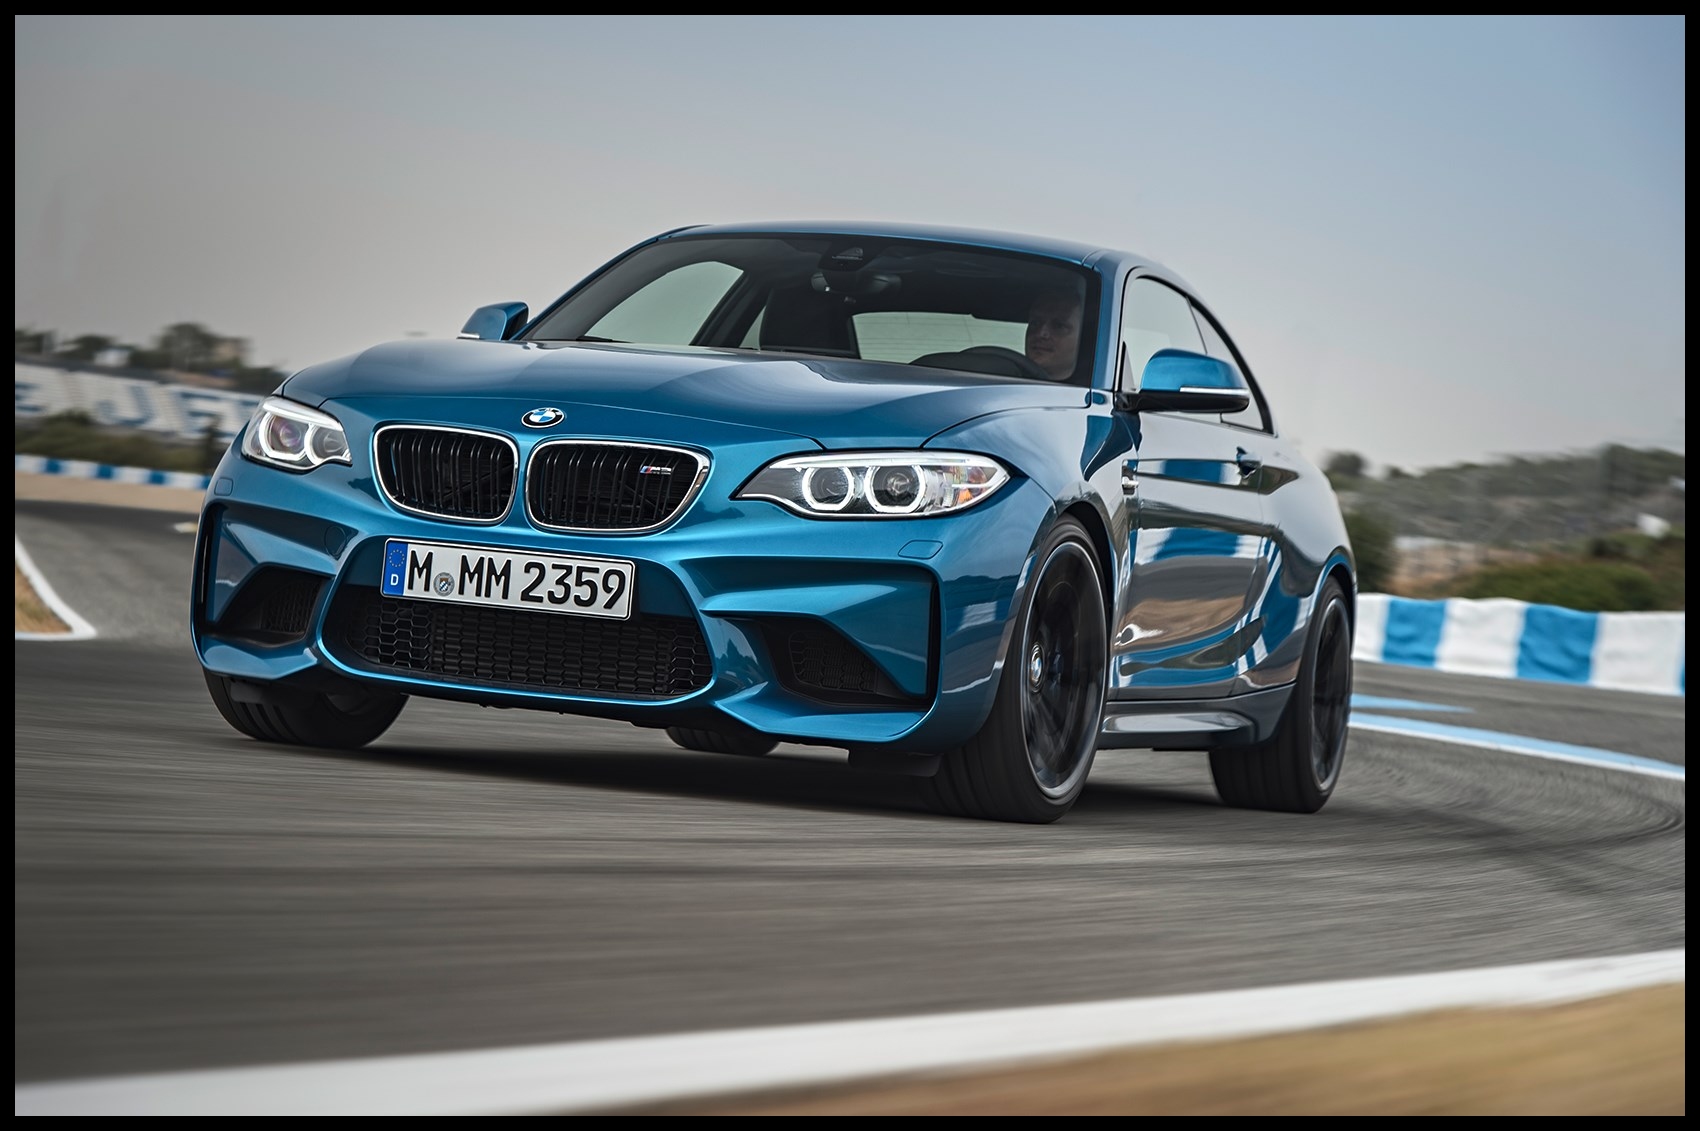 The new 2016 BMW M2